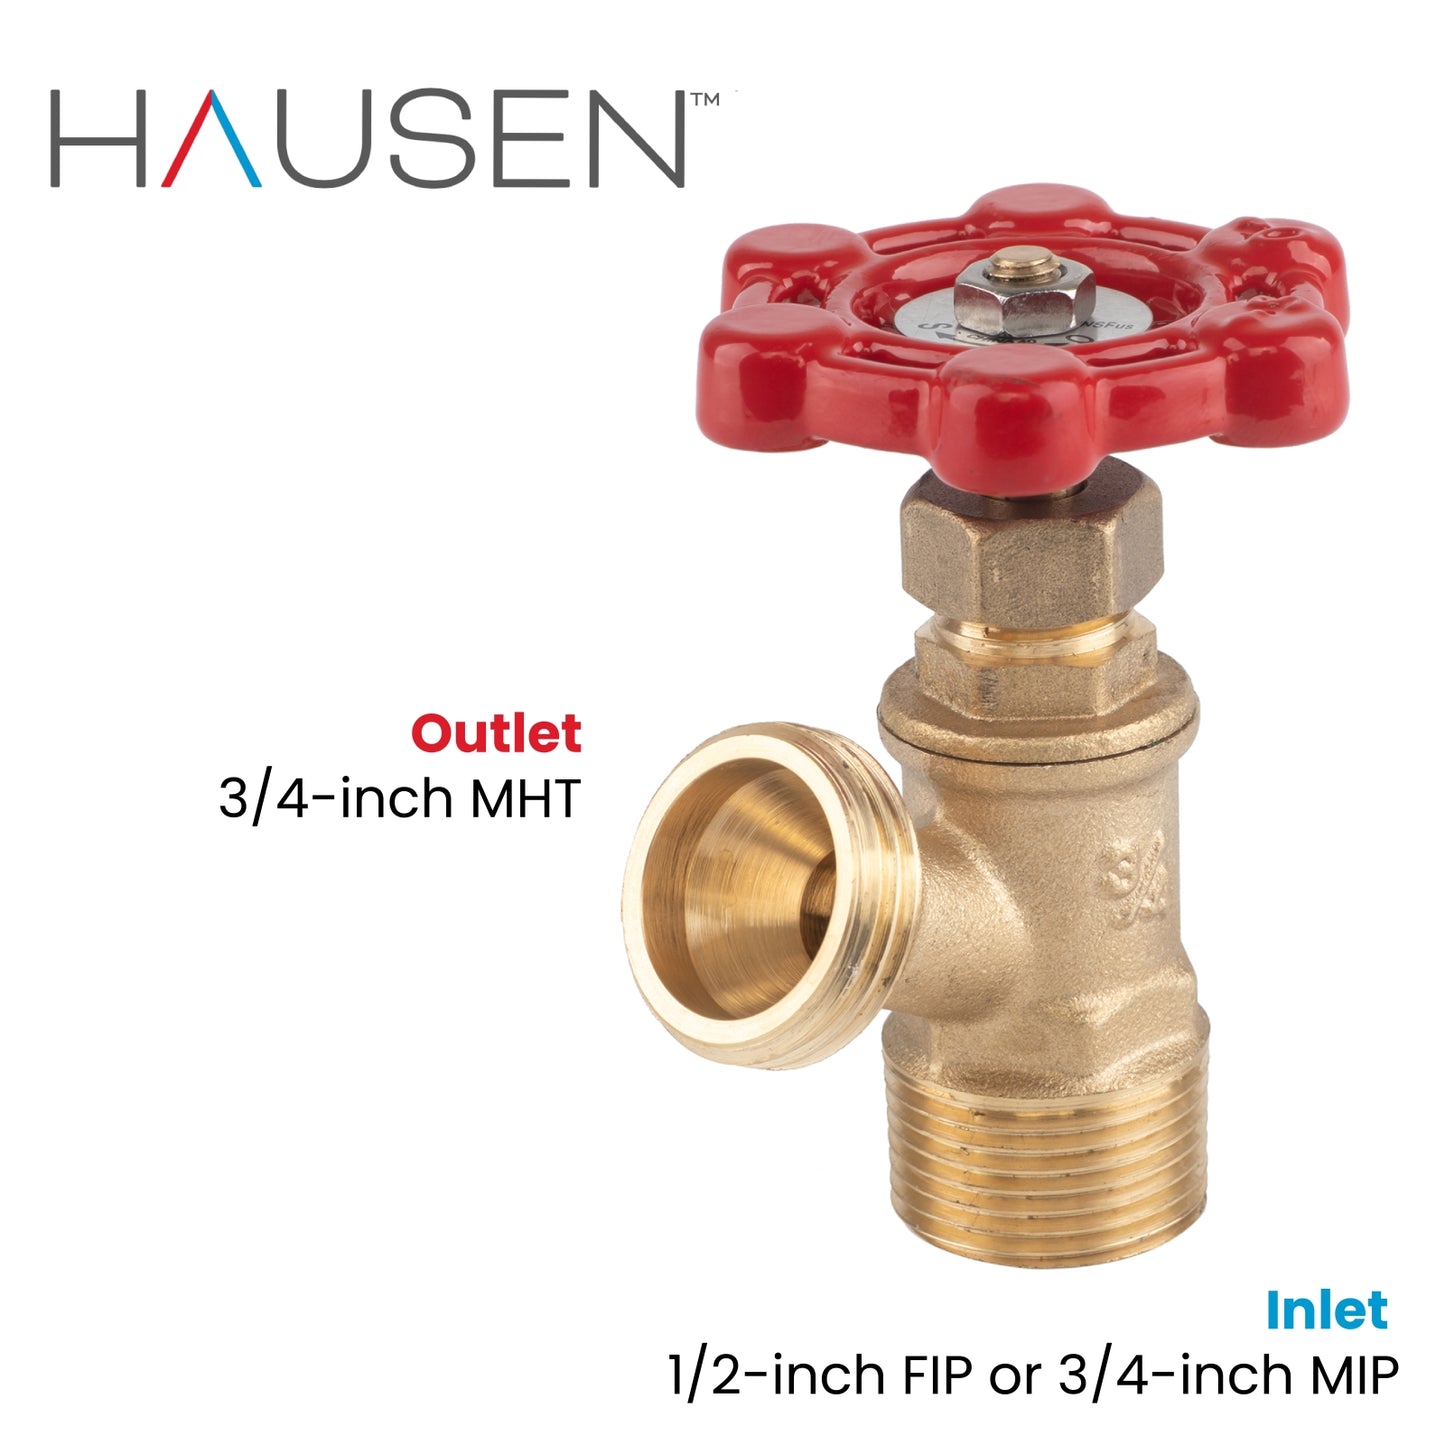 Hausen 1/2-inch FIP (Female Iron Pipe) or 3/4-inch MIP (Male Iron Pipe) x 3/4-inch MHT (Male Hose Thread) Brass Boiler Drain Valve; Compatible with Boilers and Water Heaters , 5-pack